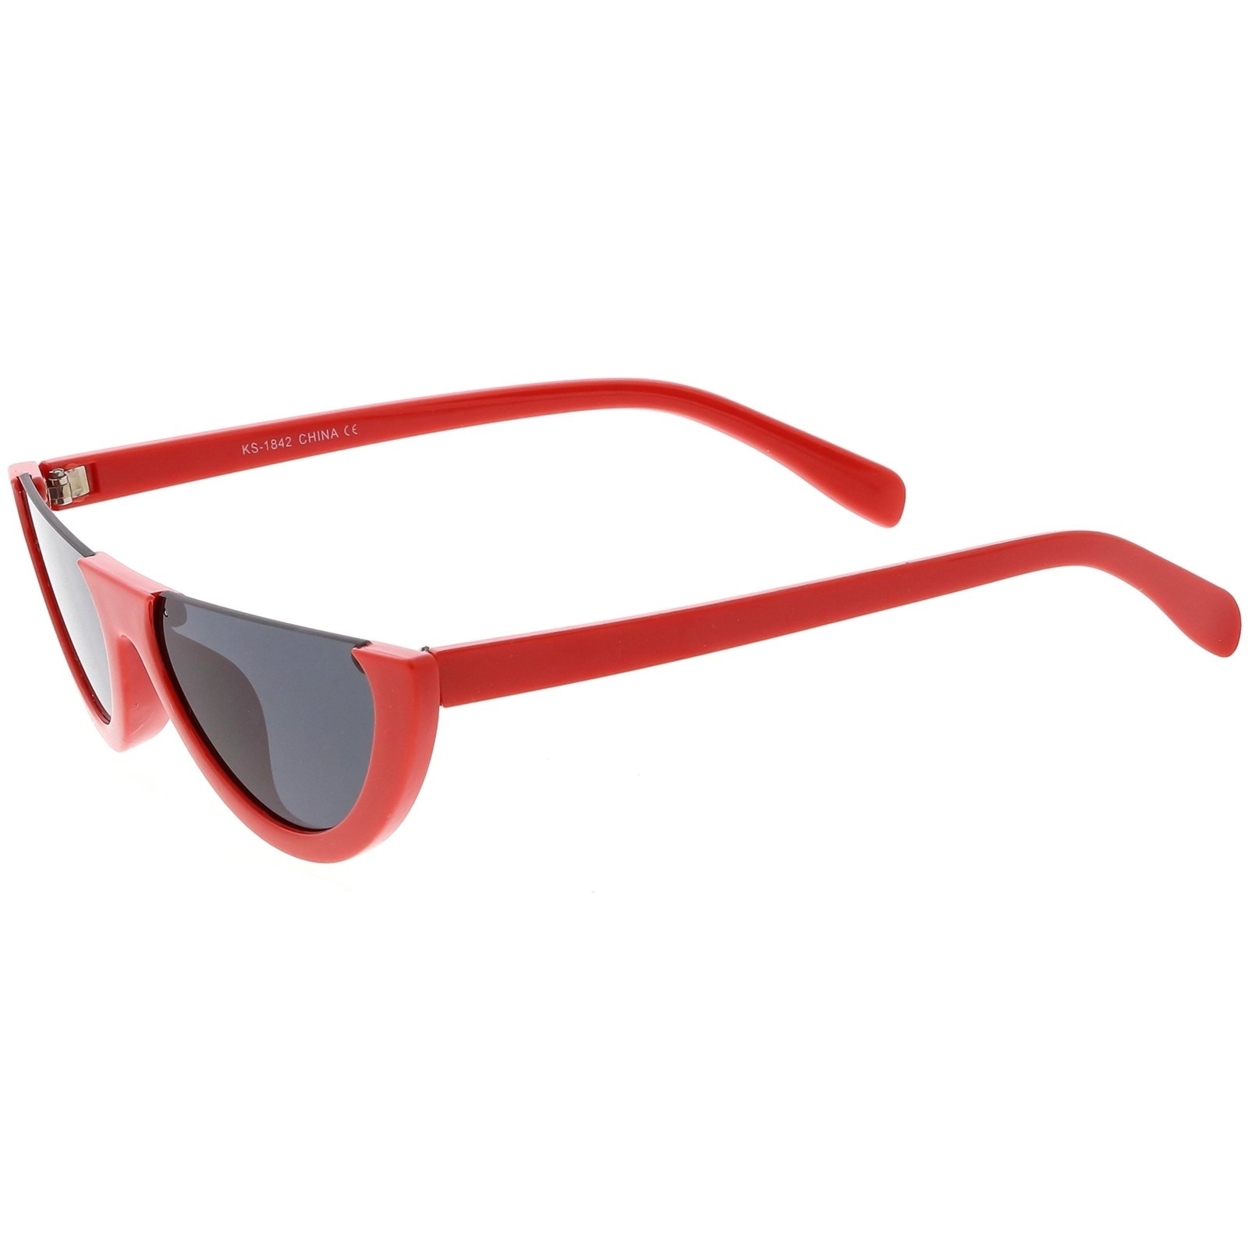 Extreme Semi Rimless Cat Eye Sunglasses Neutral Colored Lens 55mm - Red / Smoke